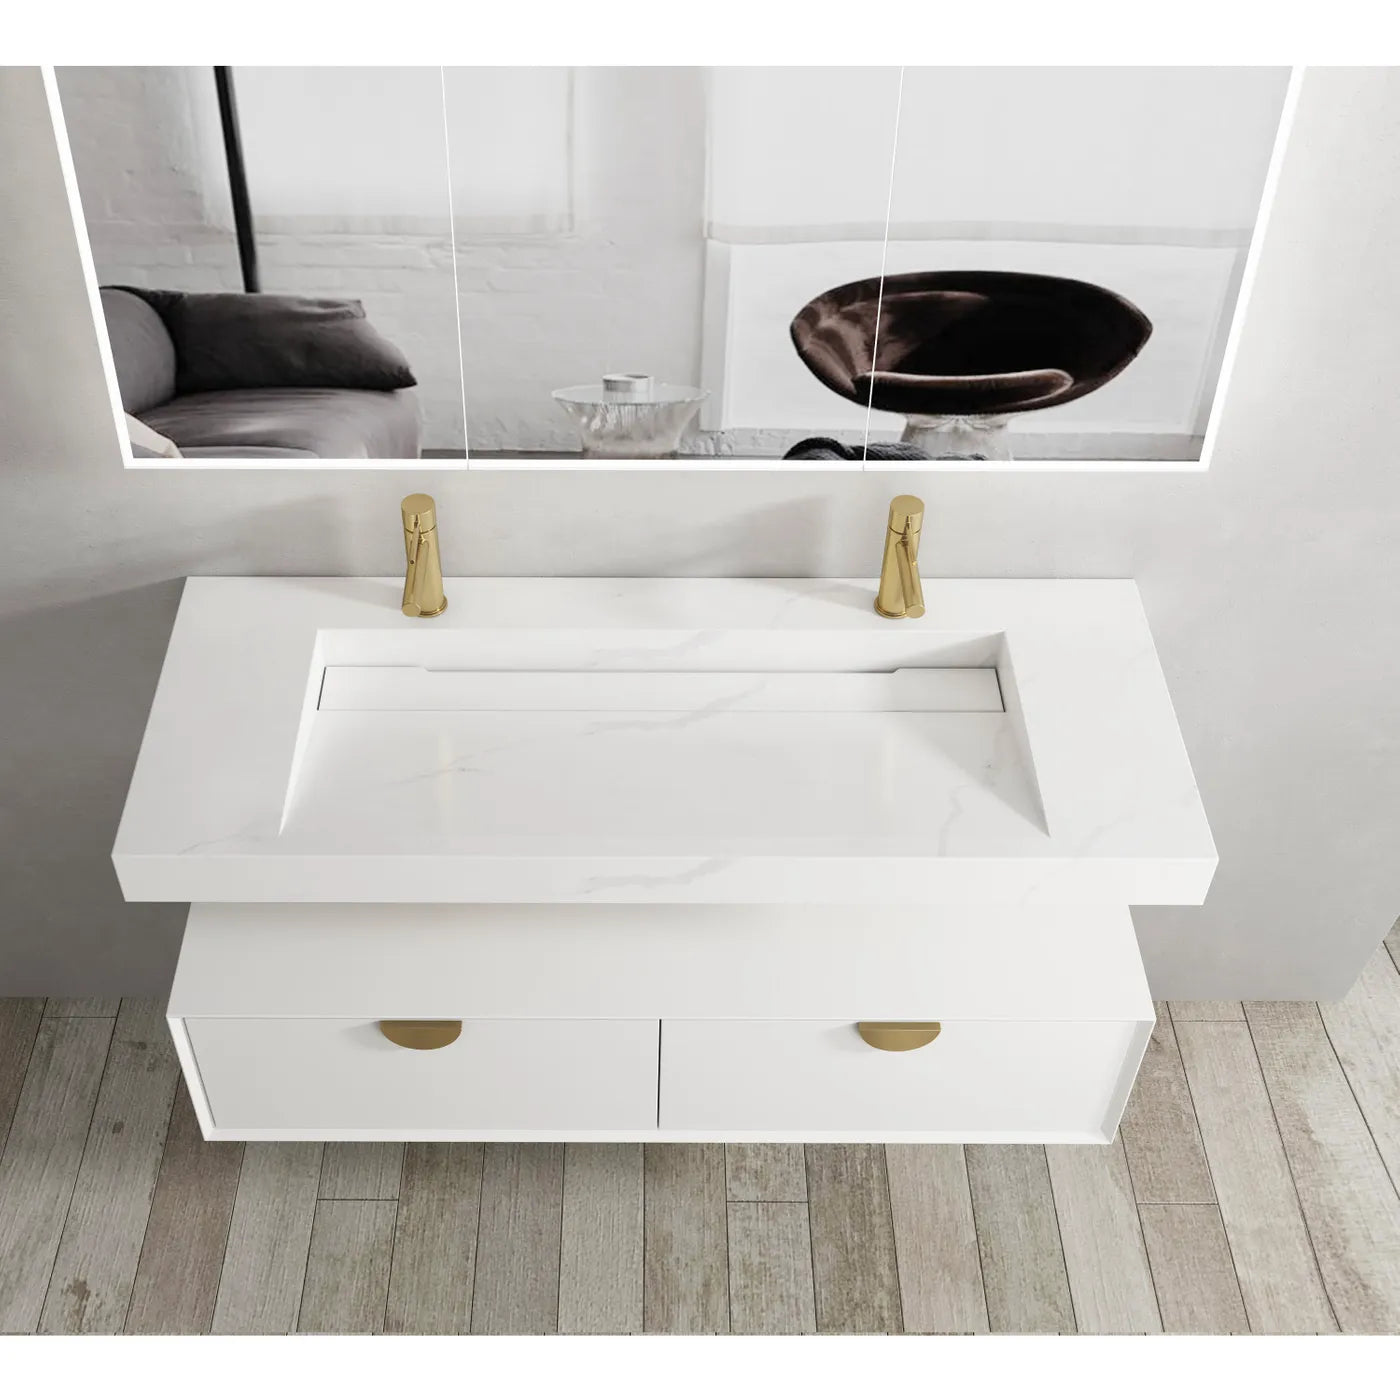 OTTI MOONLIGHT WHITE 1200MM DOUBLE BOWL WALL HUNG CABINET AND BASIN